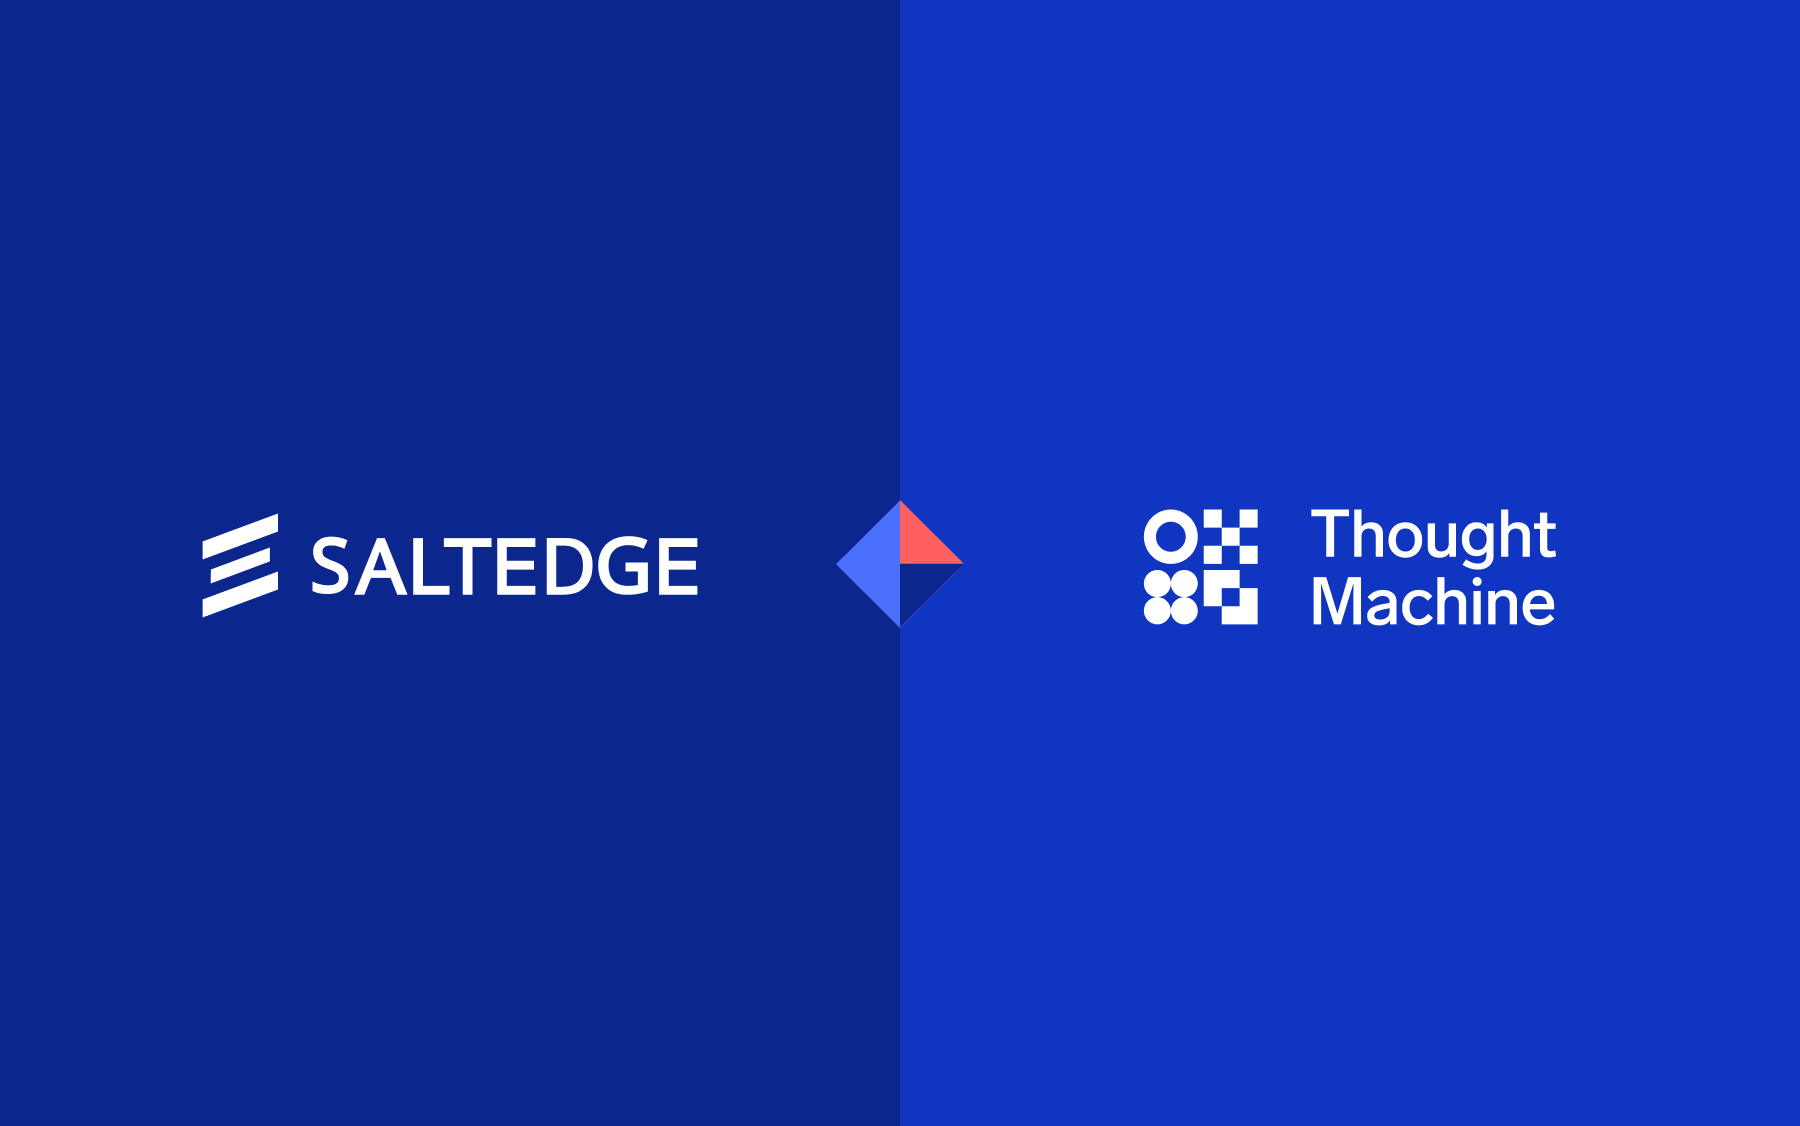 Salt Edge and Thought Machine join forces on open banking